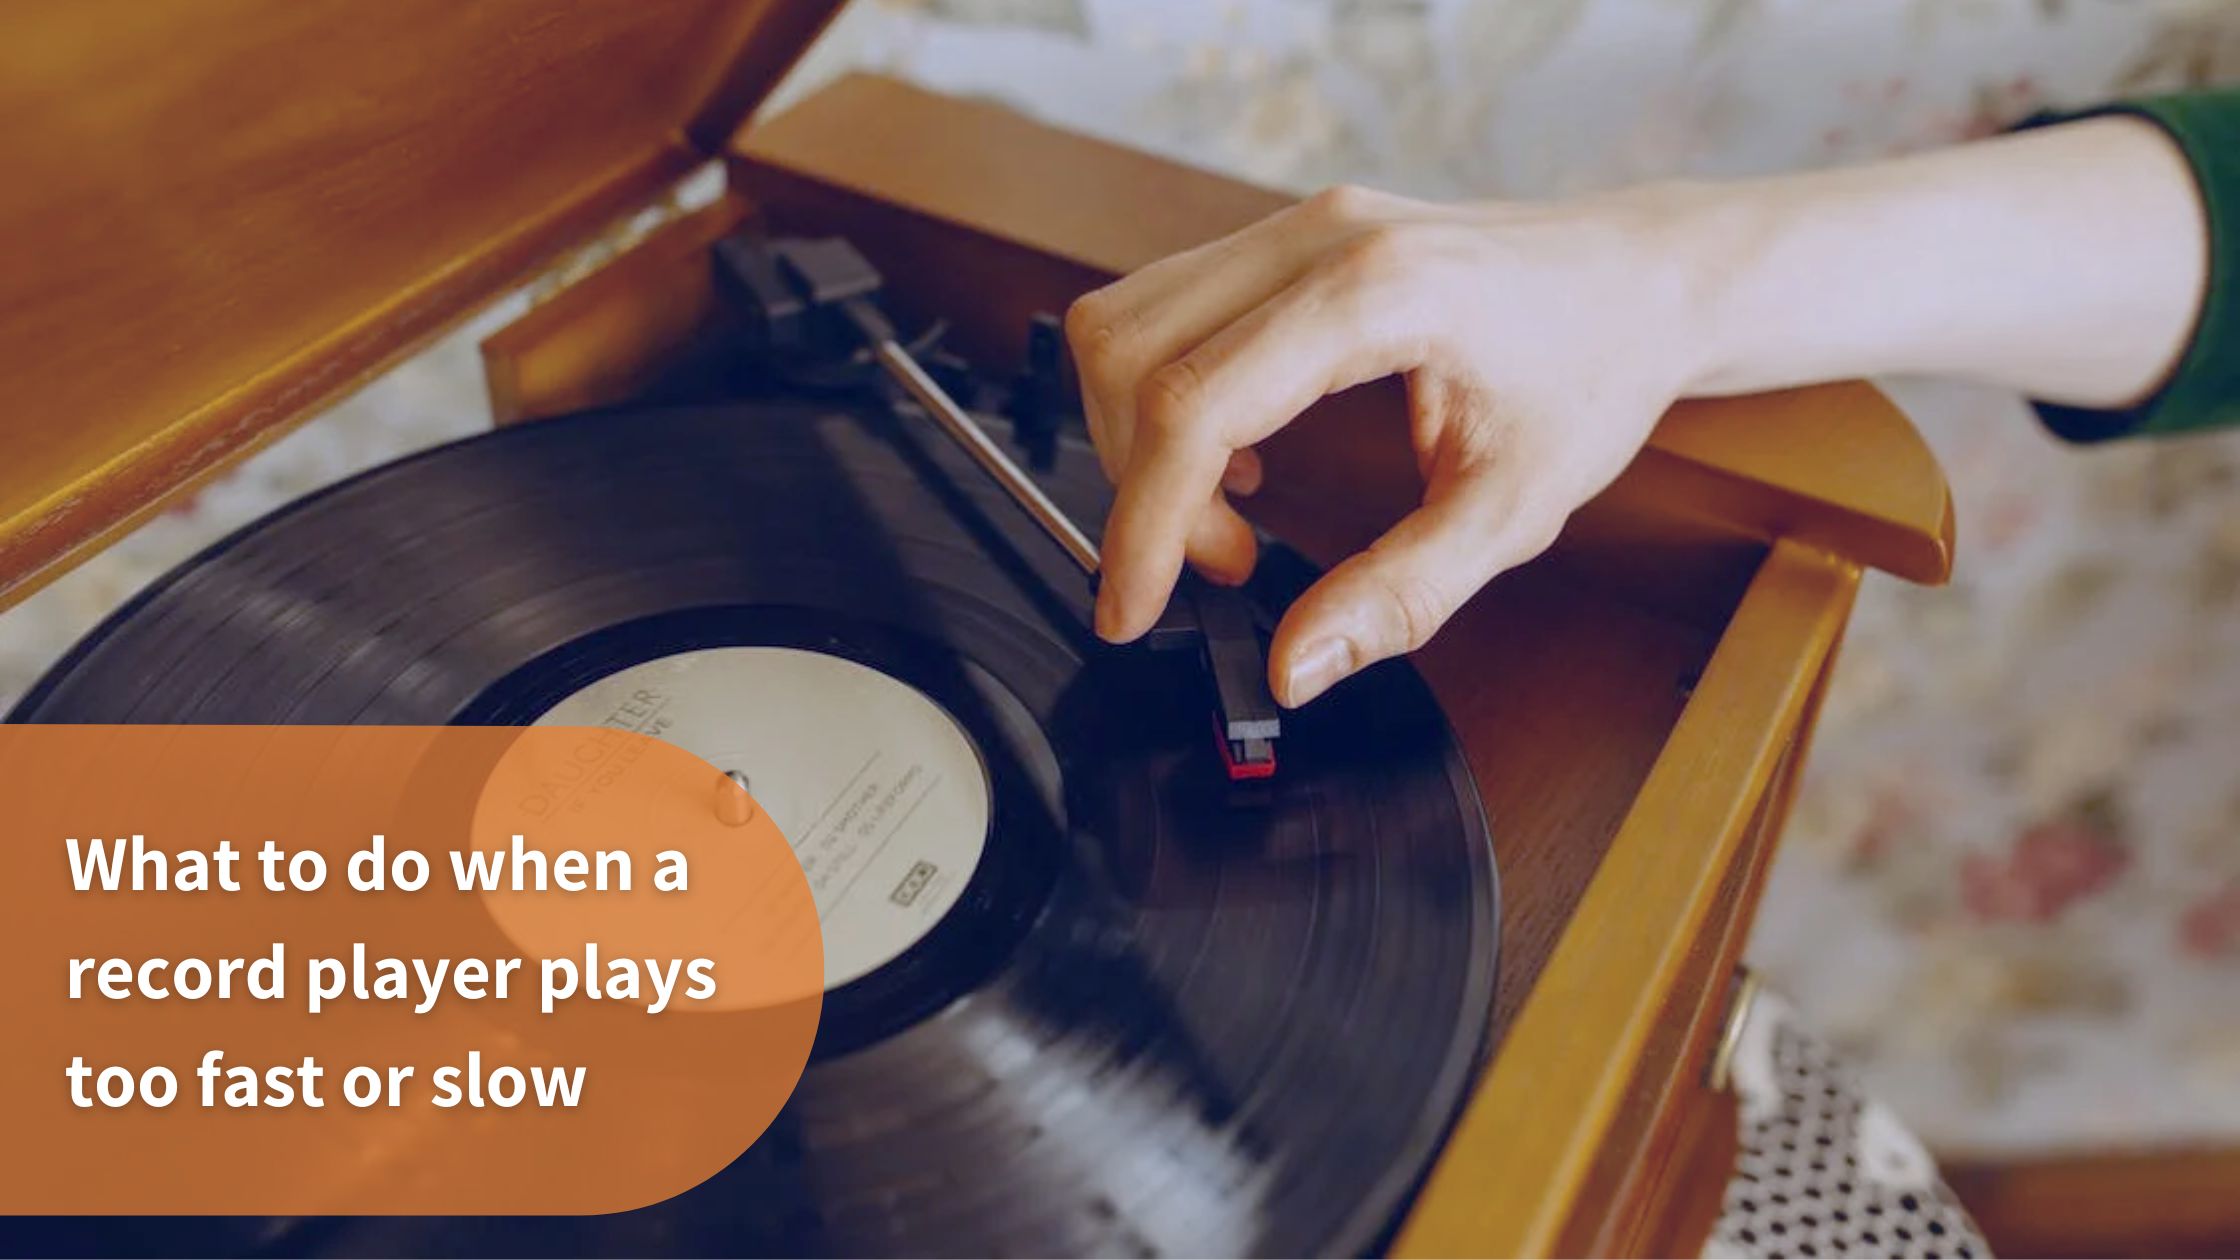 Record player playing too slow while someone listens to music